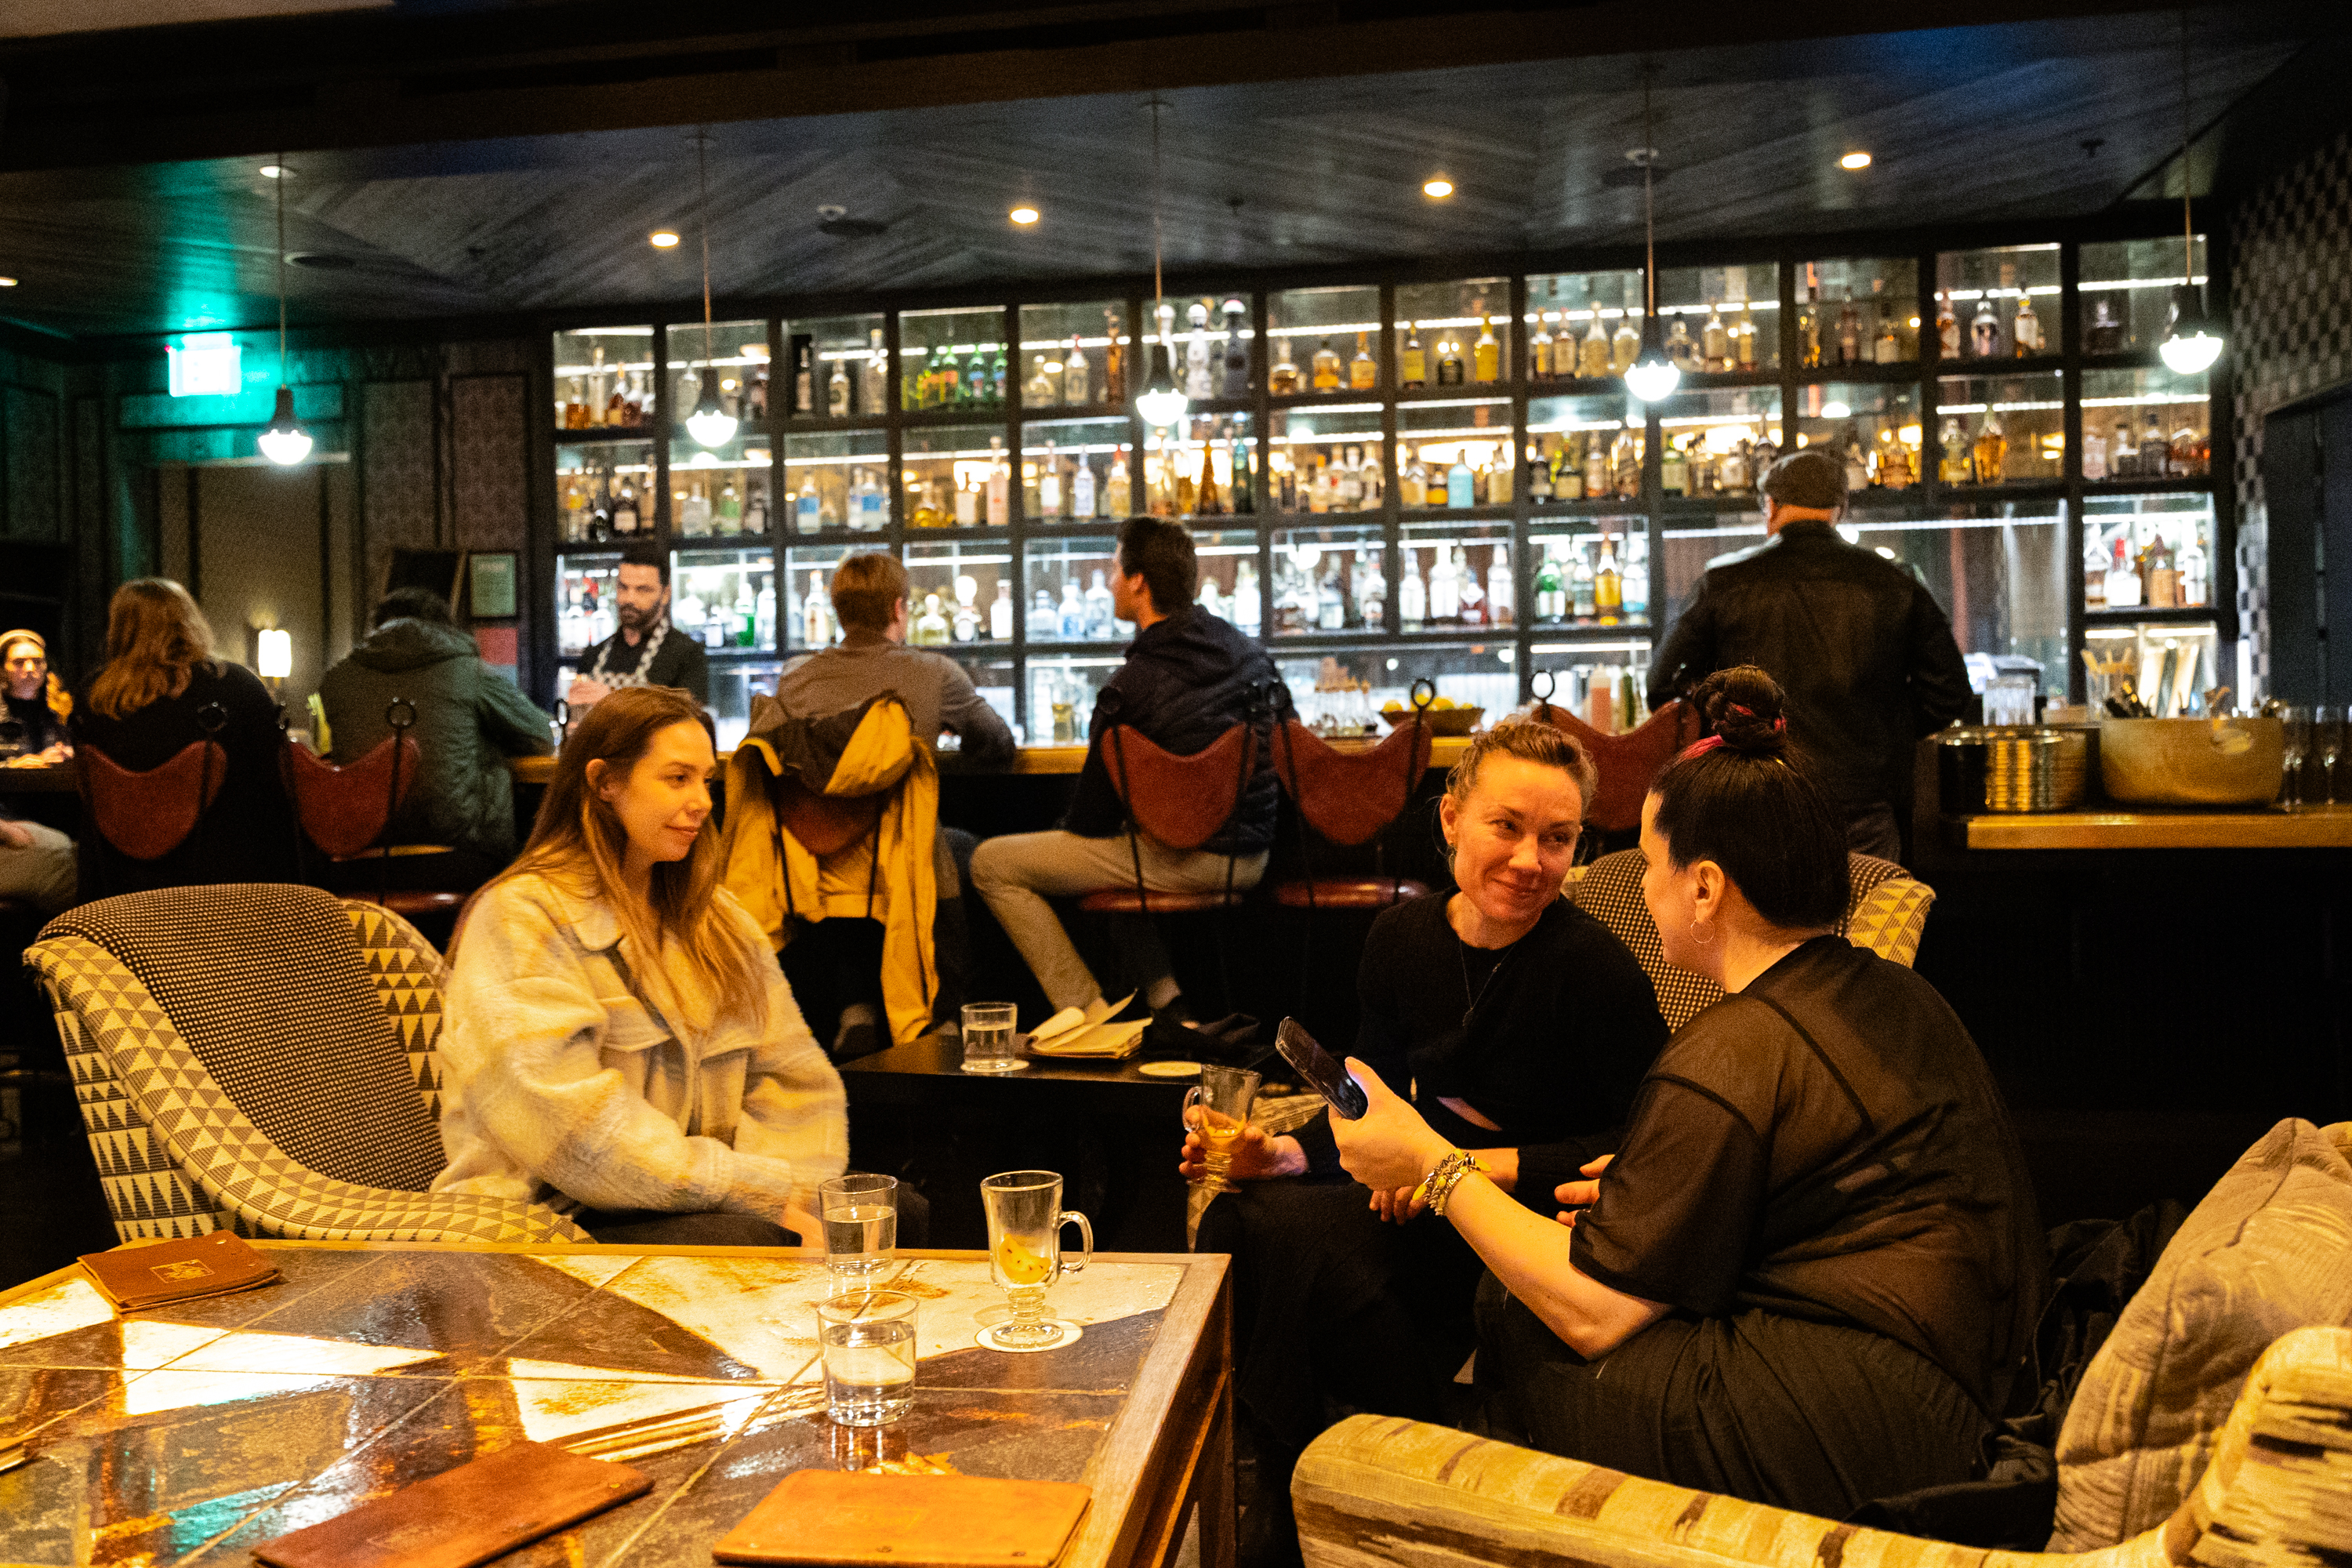 People socializing in a cozy bar with a backlit shelf of bottles.